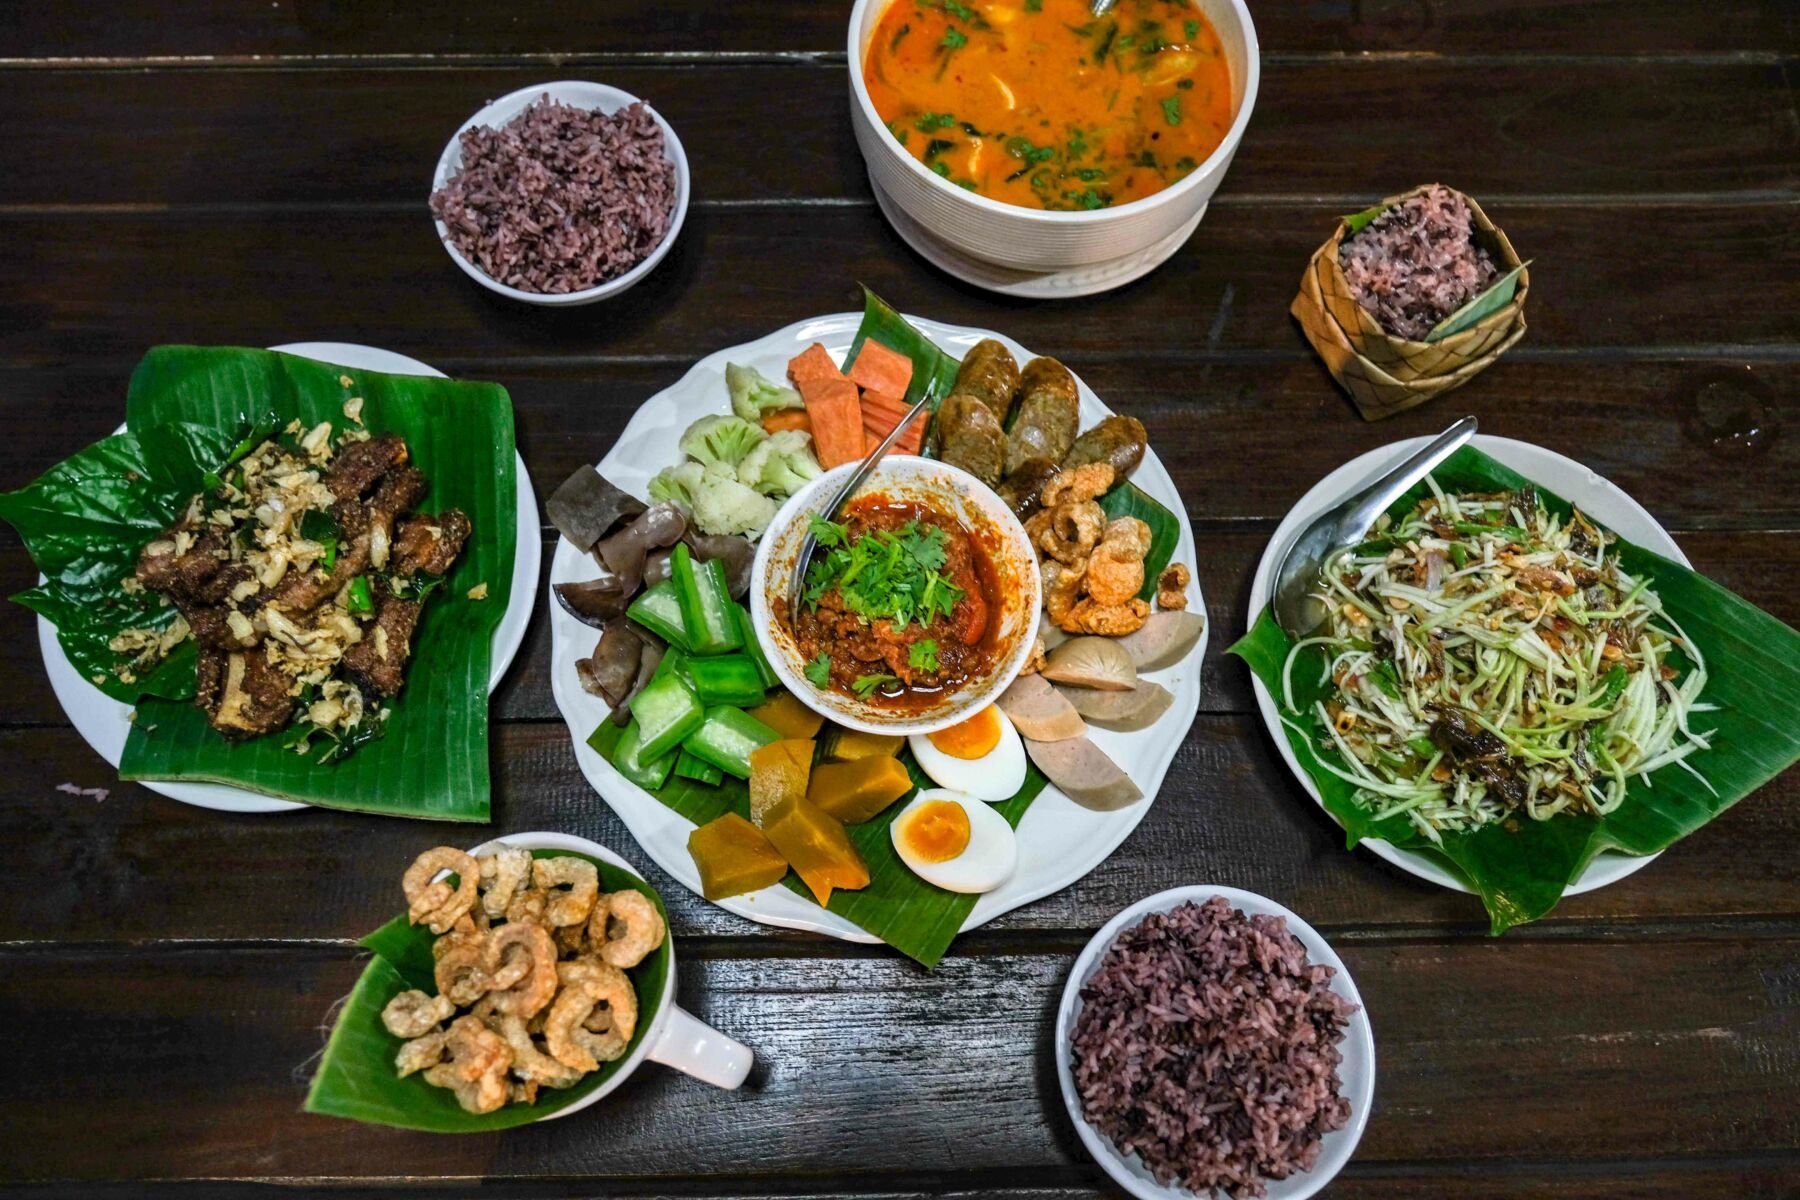 Ministry serves up a vote: Help ‘dish’ out Thailand’s best local eats